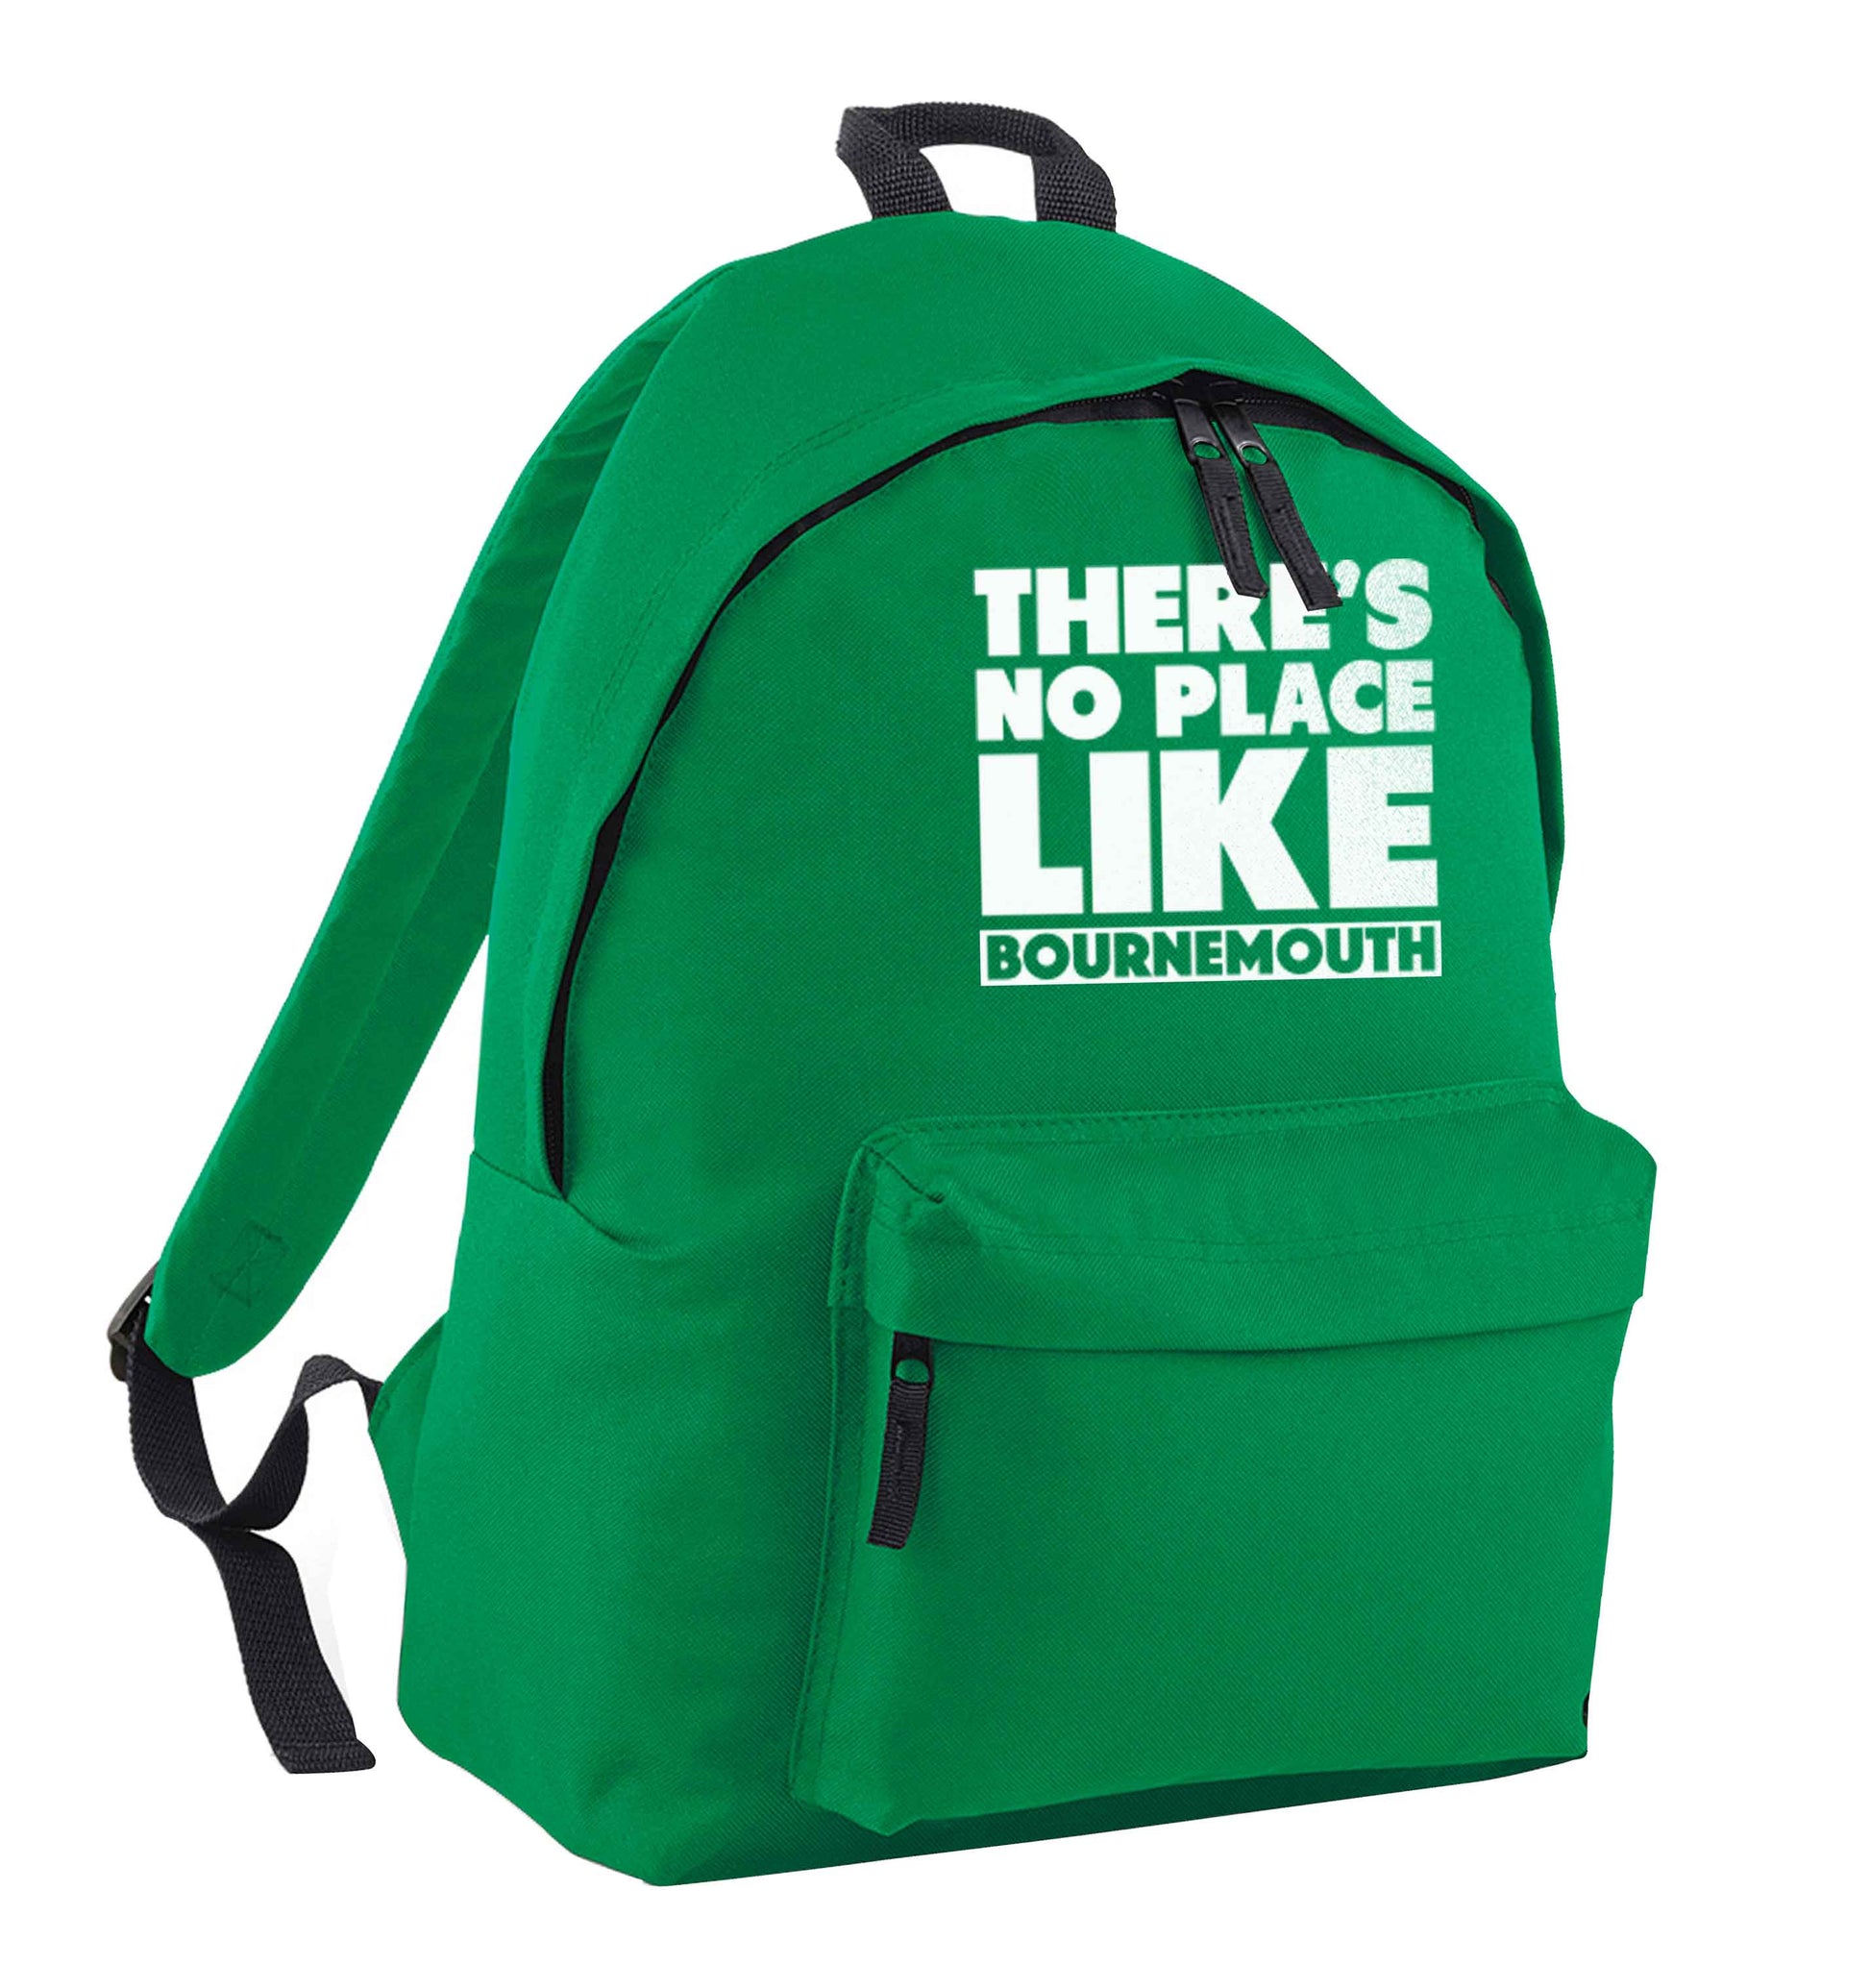 There's no place like Bournemouth green adults backpack